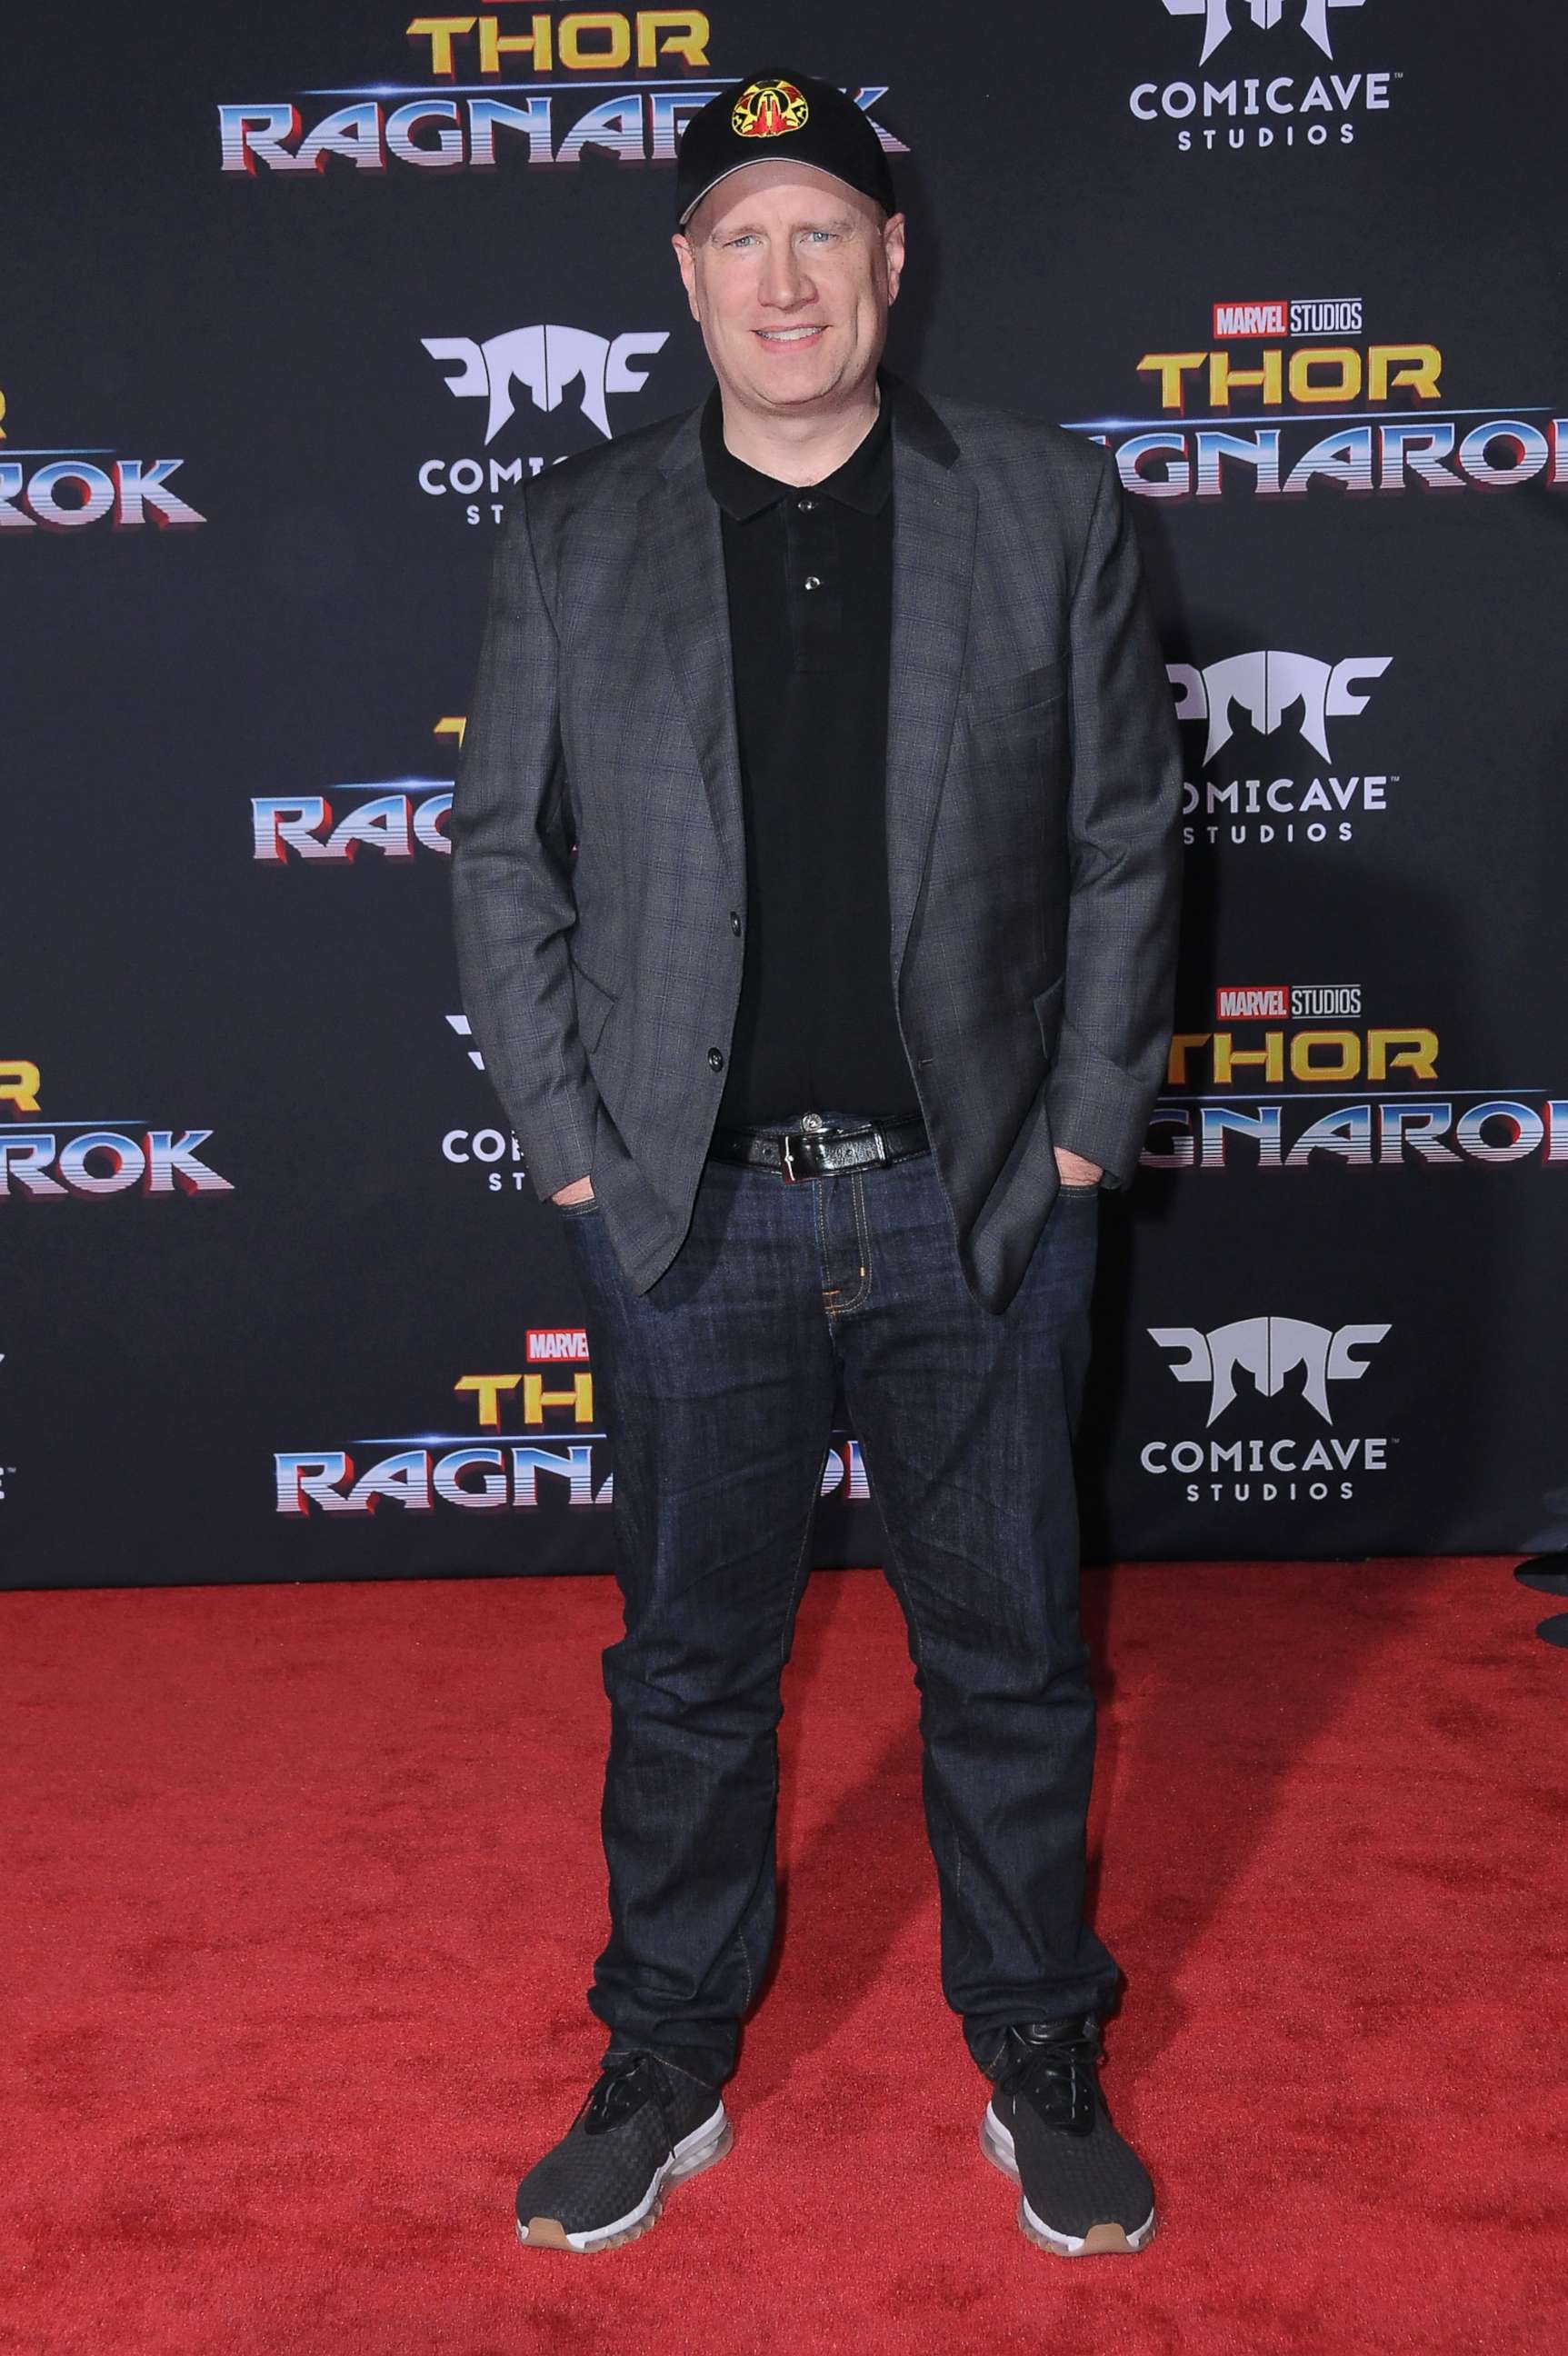 PHOTO: Producer Kevin Feige attends the World premiere of Disney and Marvel's 'Thor: Ragnarok' at El Capitan Theatre, Oct. 10, 2017 in Los Angeles.